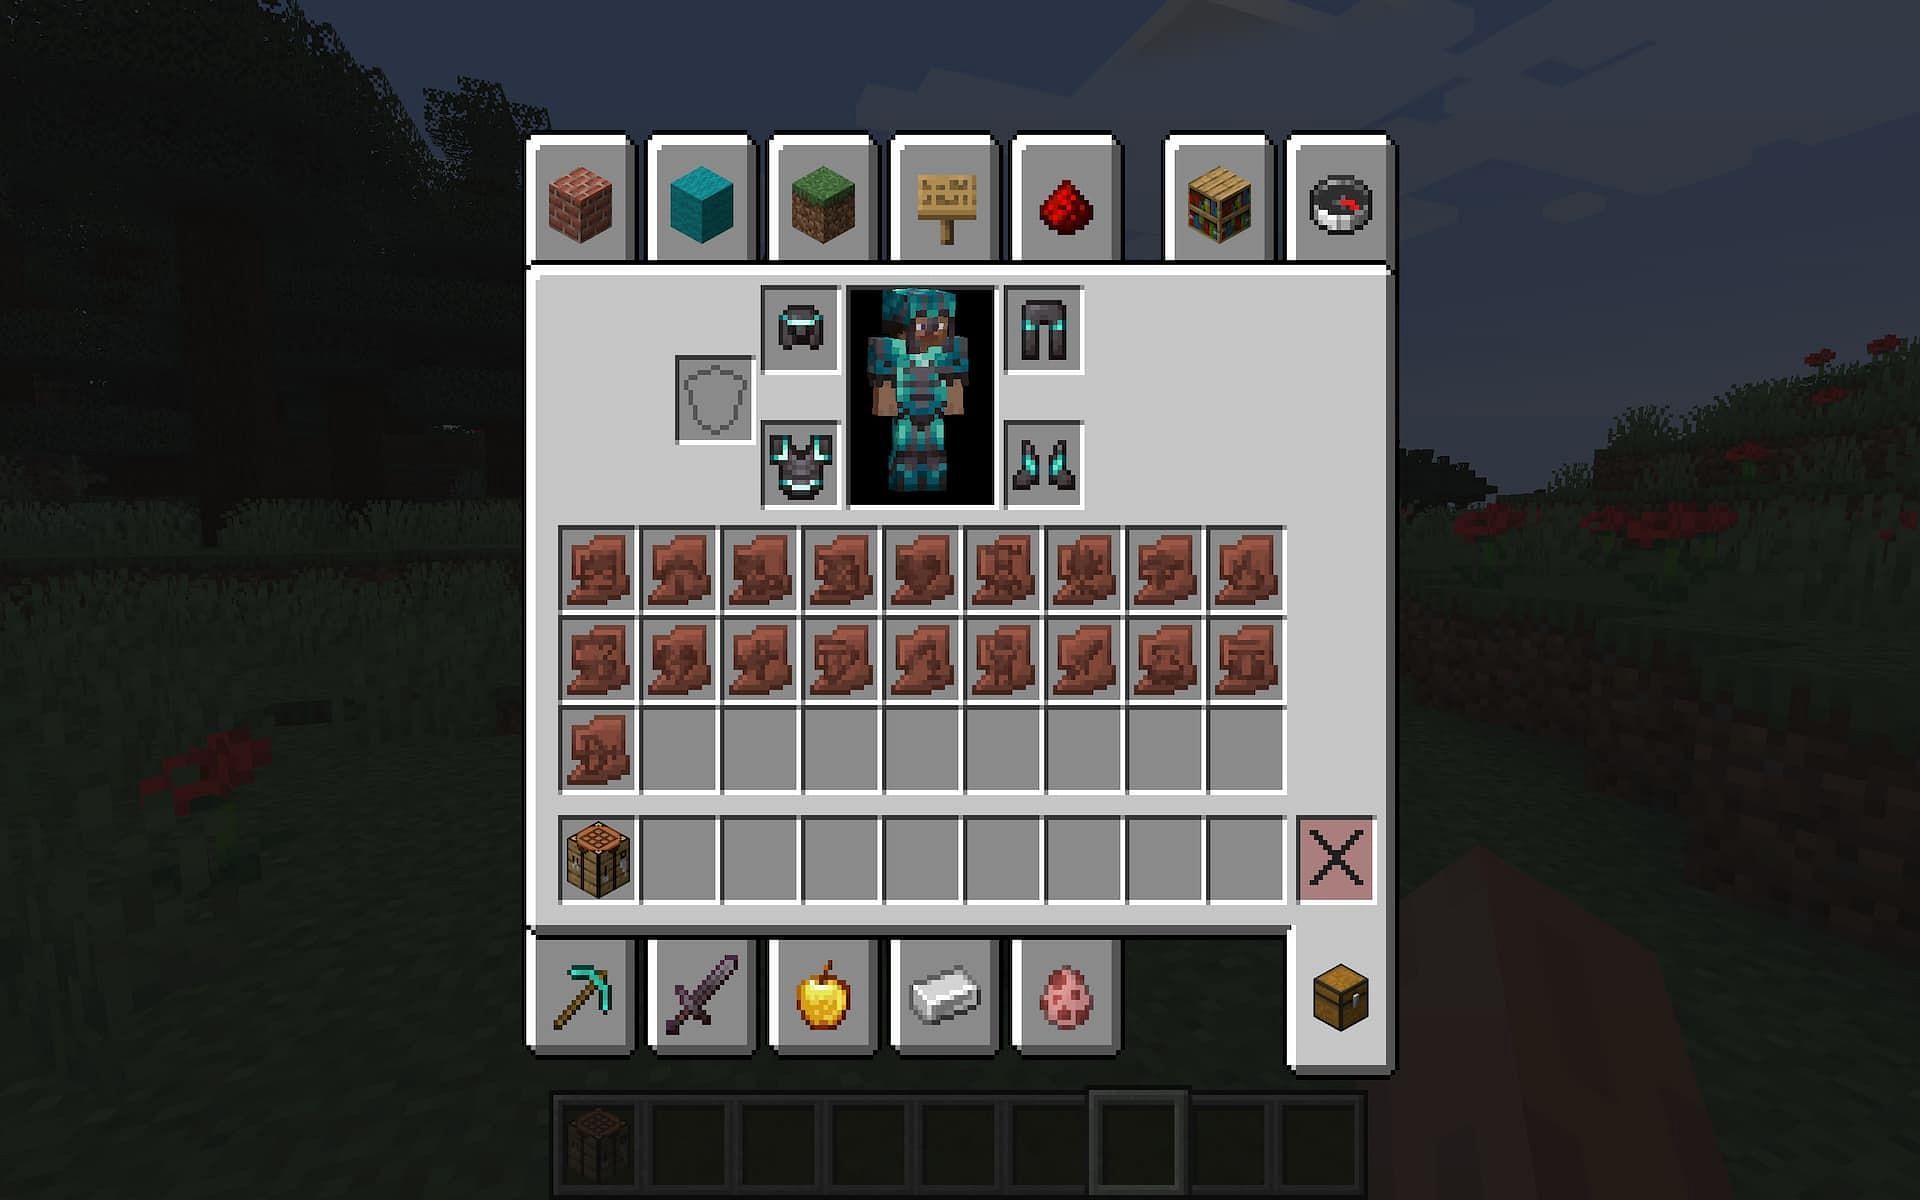 With the additional pottery shards, there are now 20 in game (Image via Minecraft)